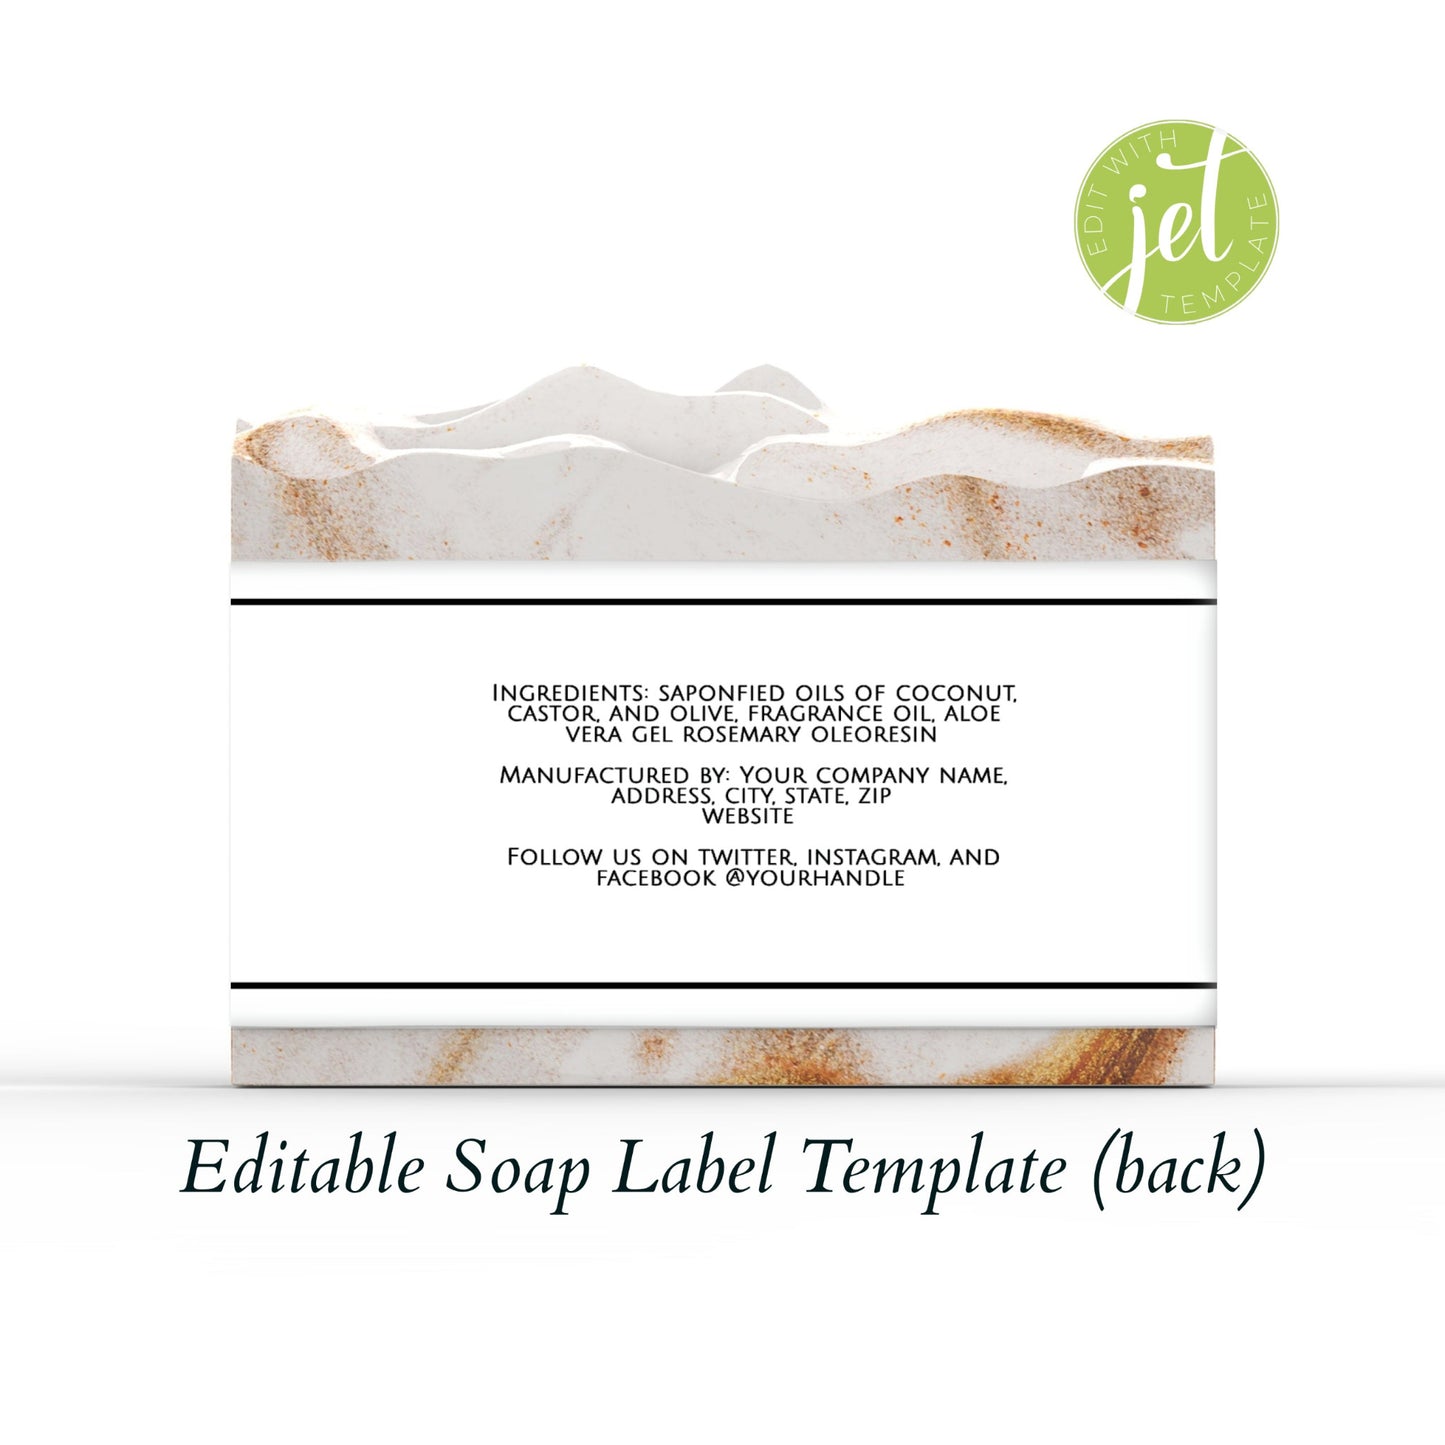 Simple White and Black Editable Printable Soap Label Template (You can change the color of the background))